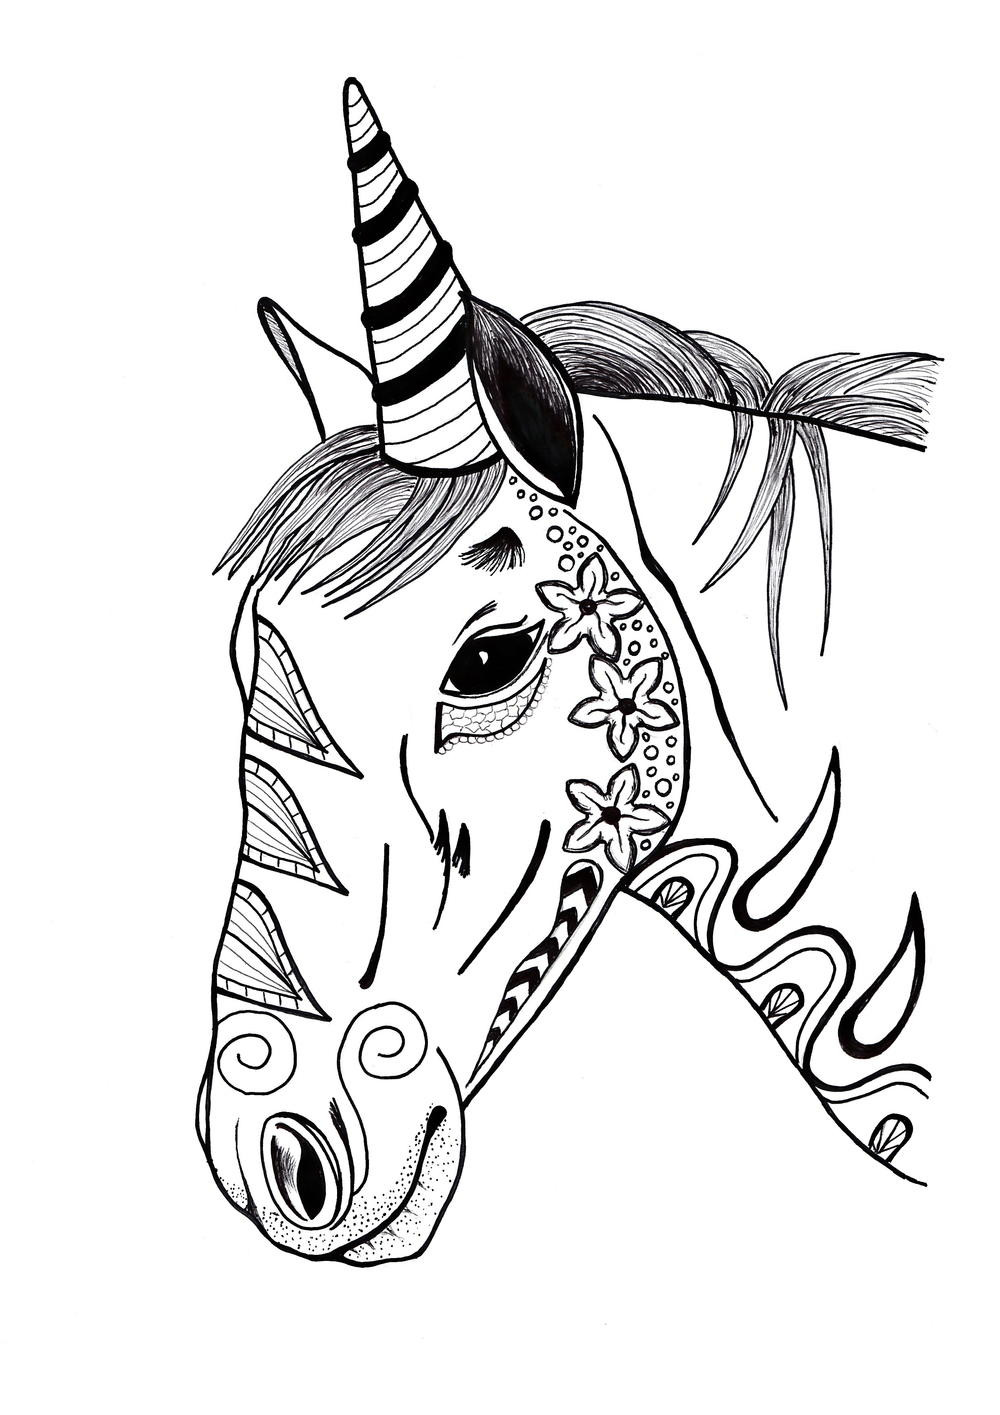 Adult Coloring Pages Unicorn
 Colorful Unicorn Adult Coloring Page